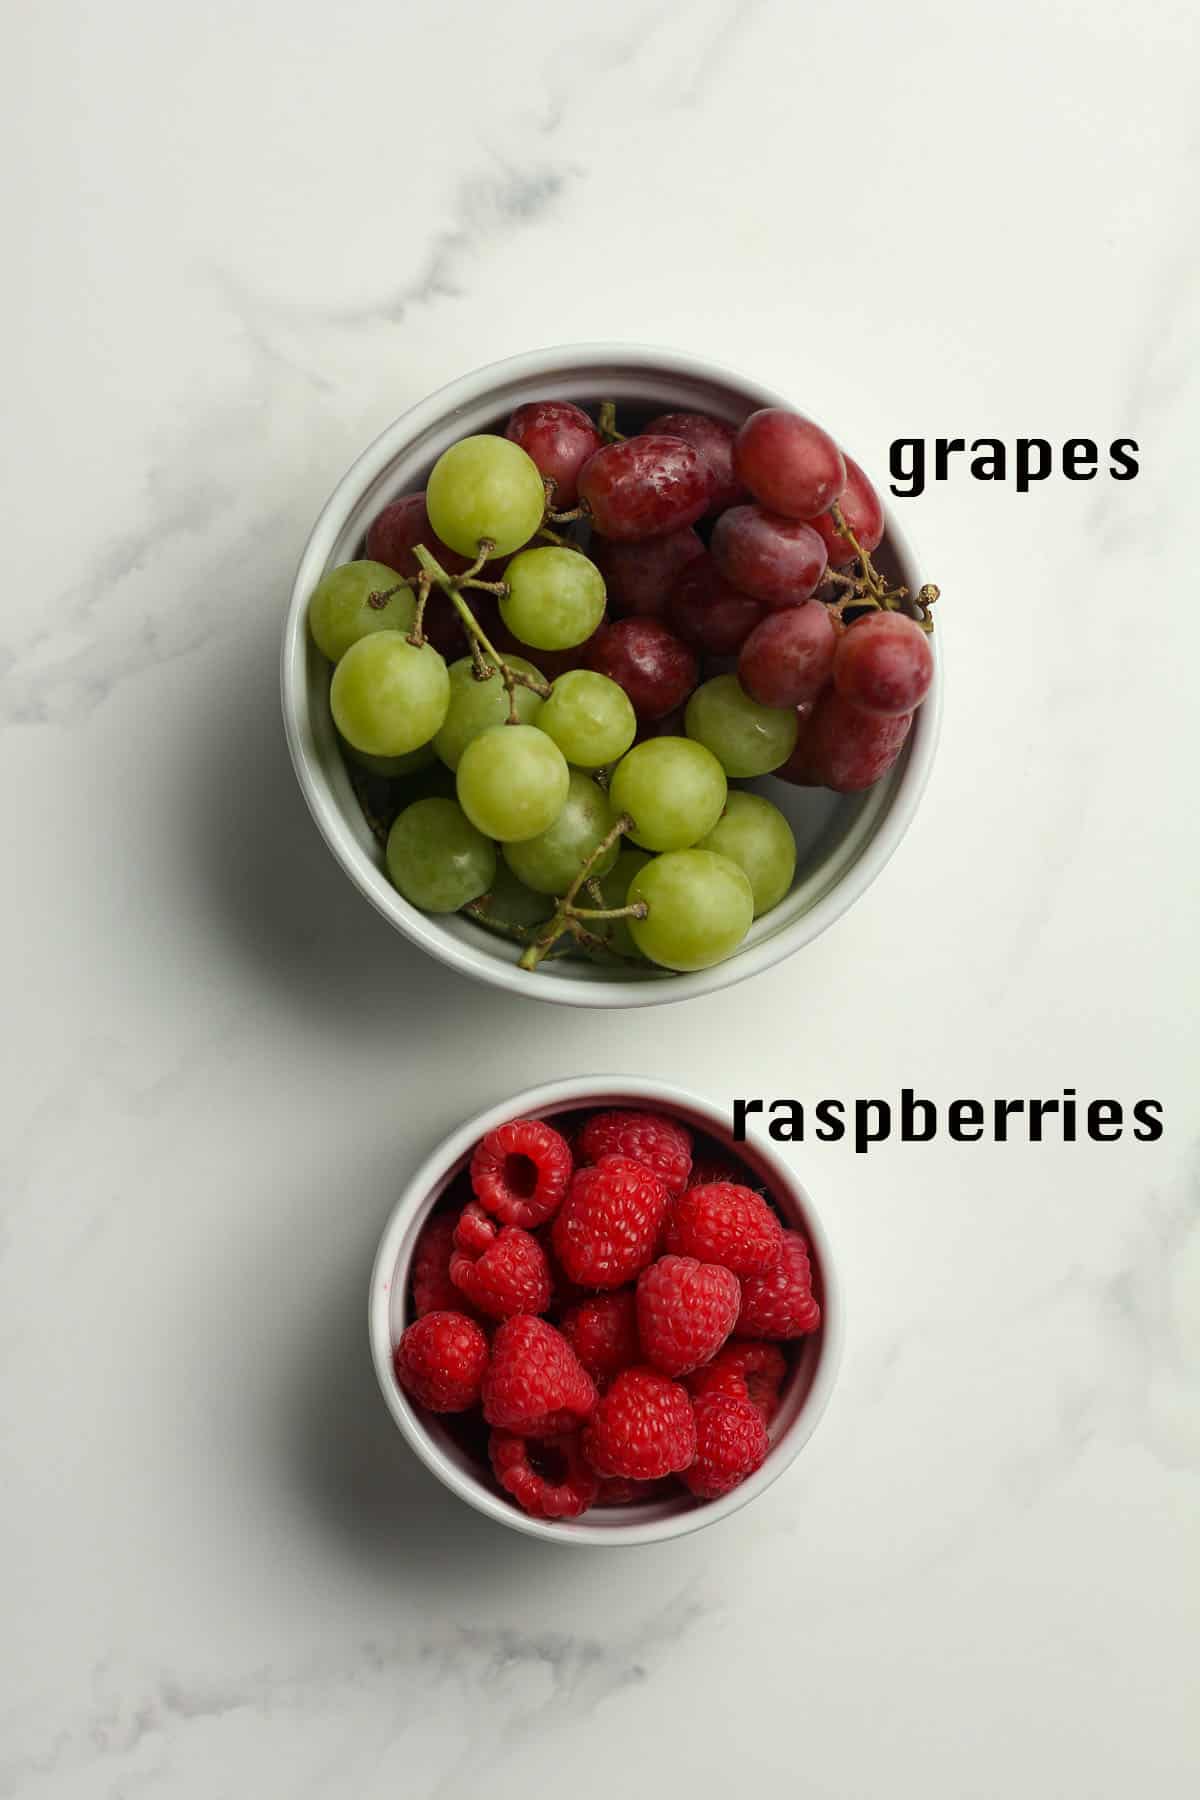 Bowls of grapes and raspberries.